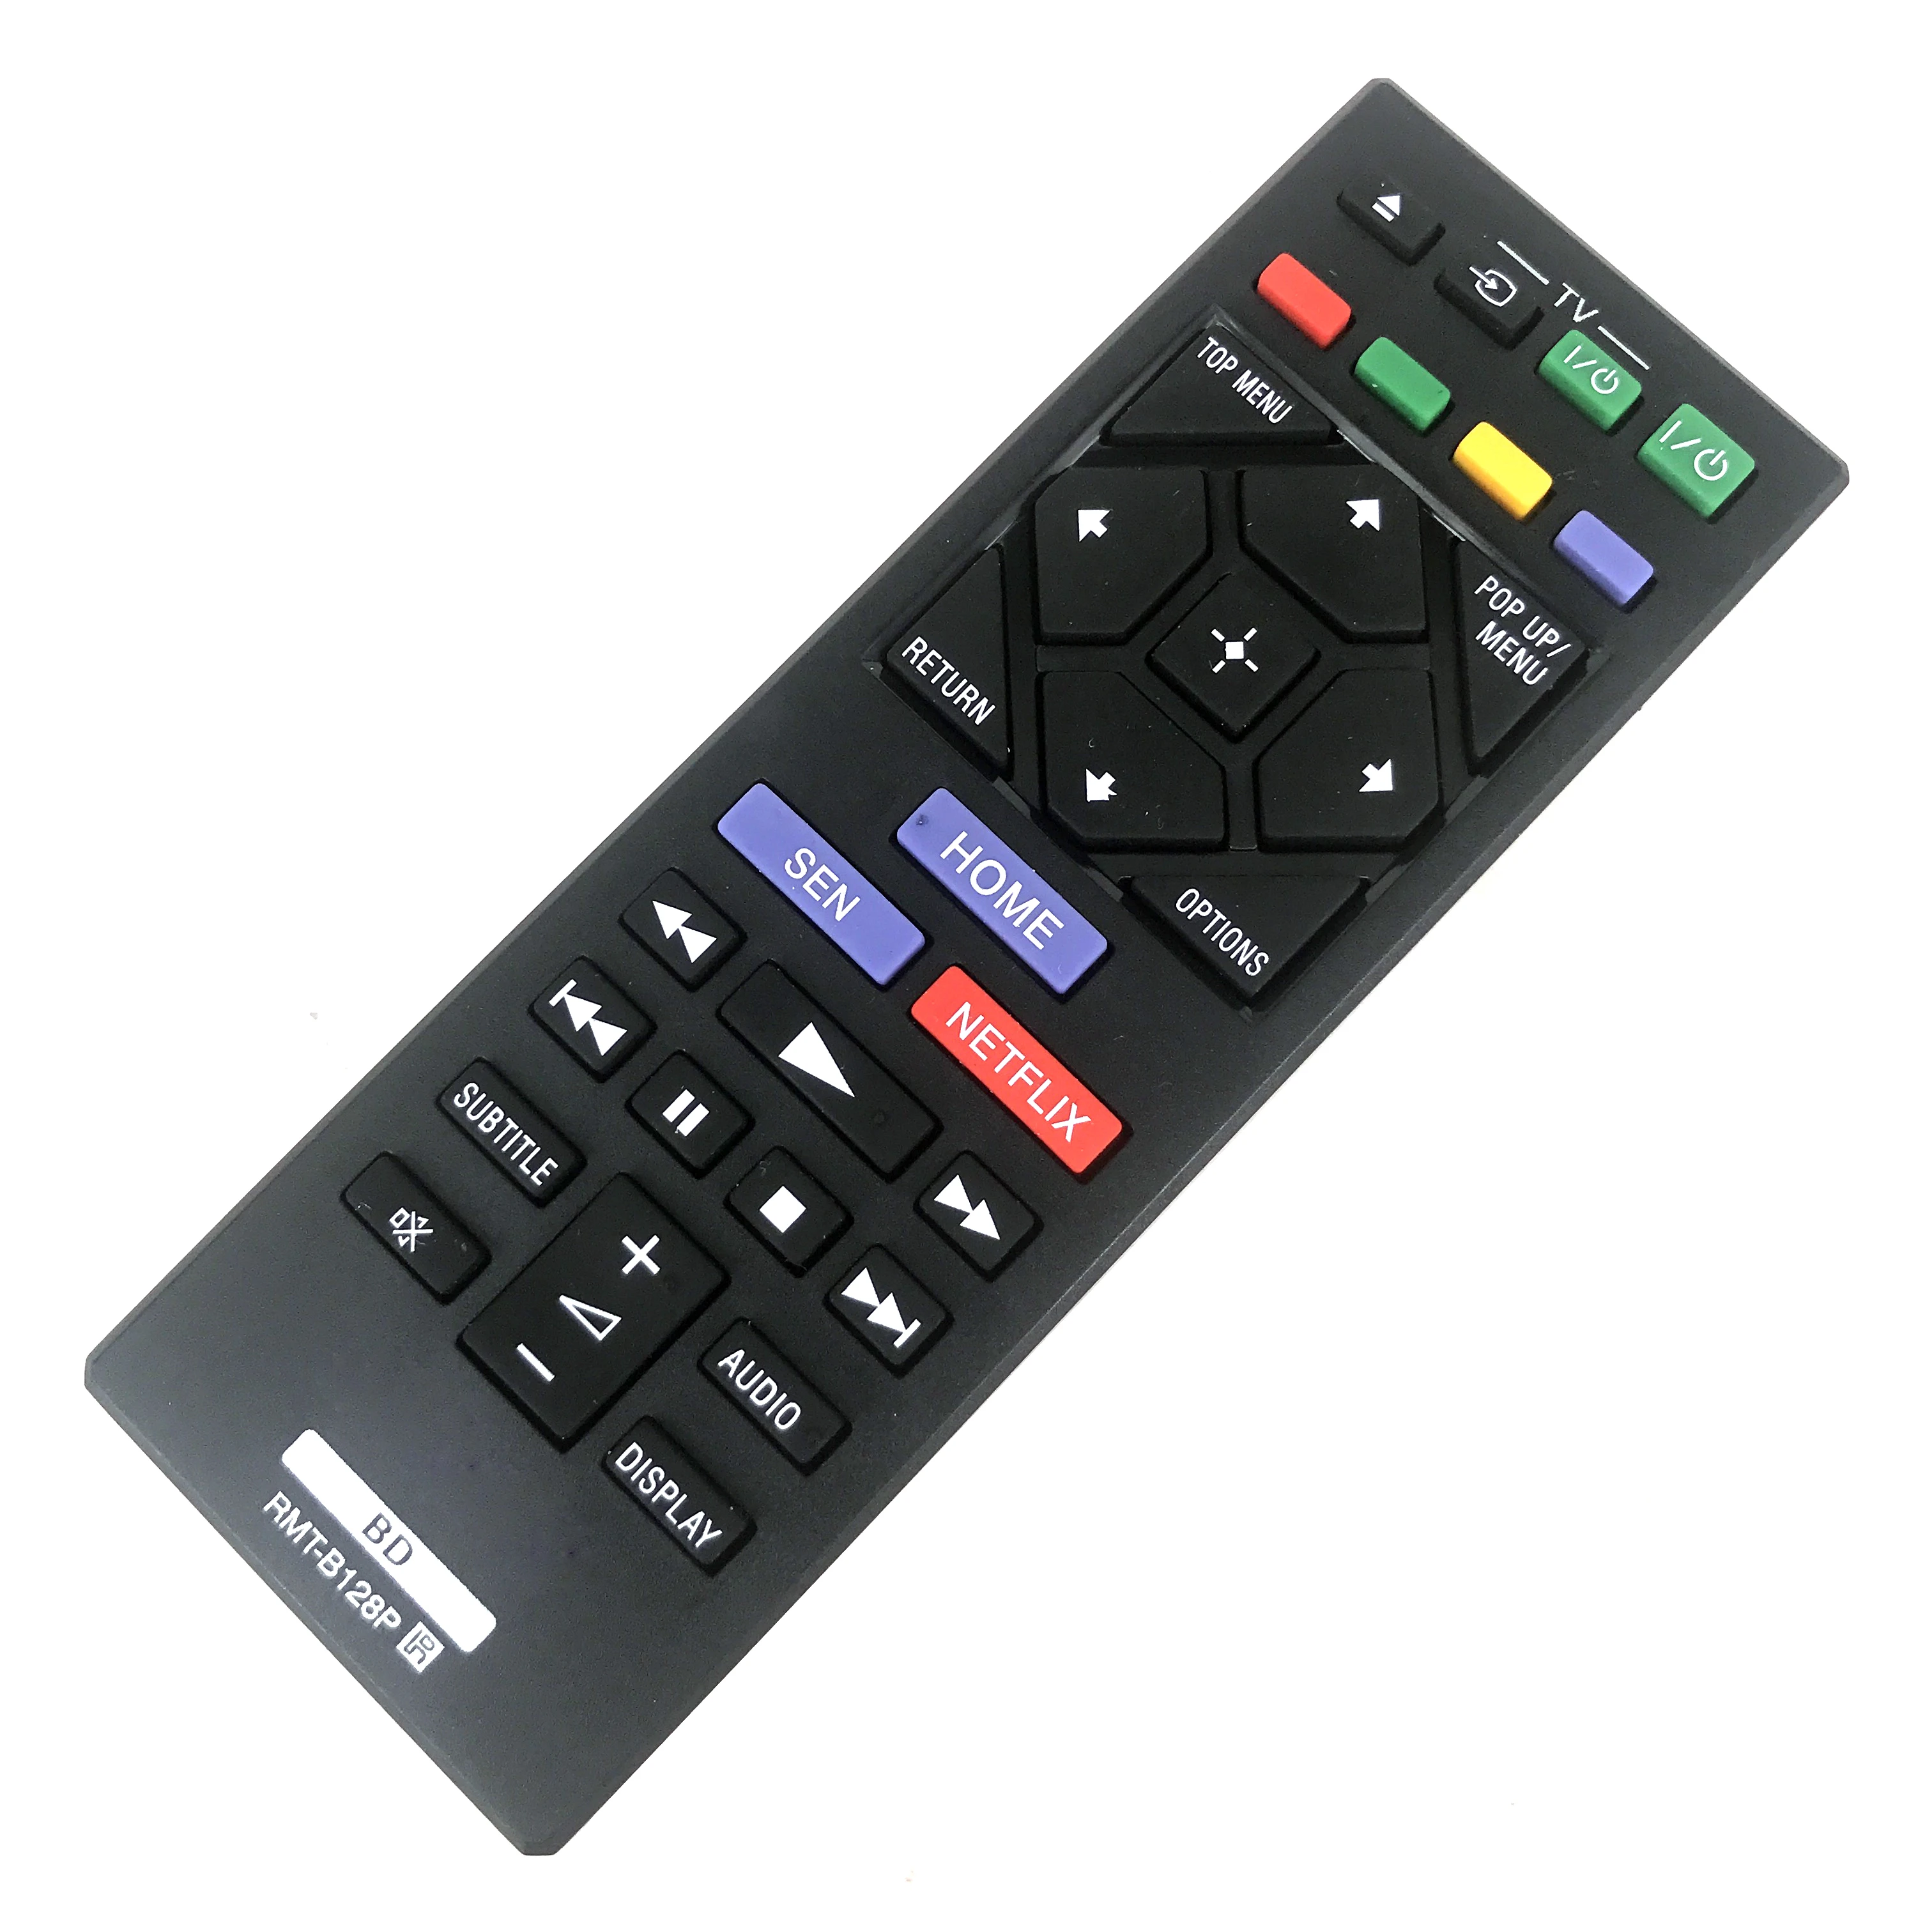 

NEW Remote control RMT-B128P For SONY Blu-ray Disc Player BDP-S1200 BDP-S3200 BDP-S4200 BDP-S5200 BDP-S7200